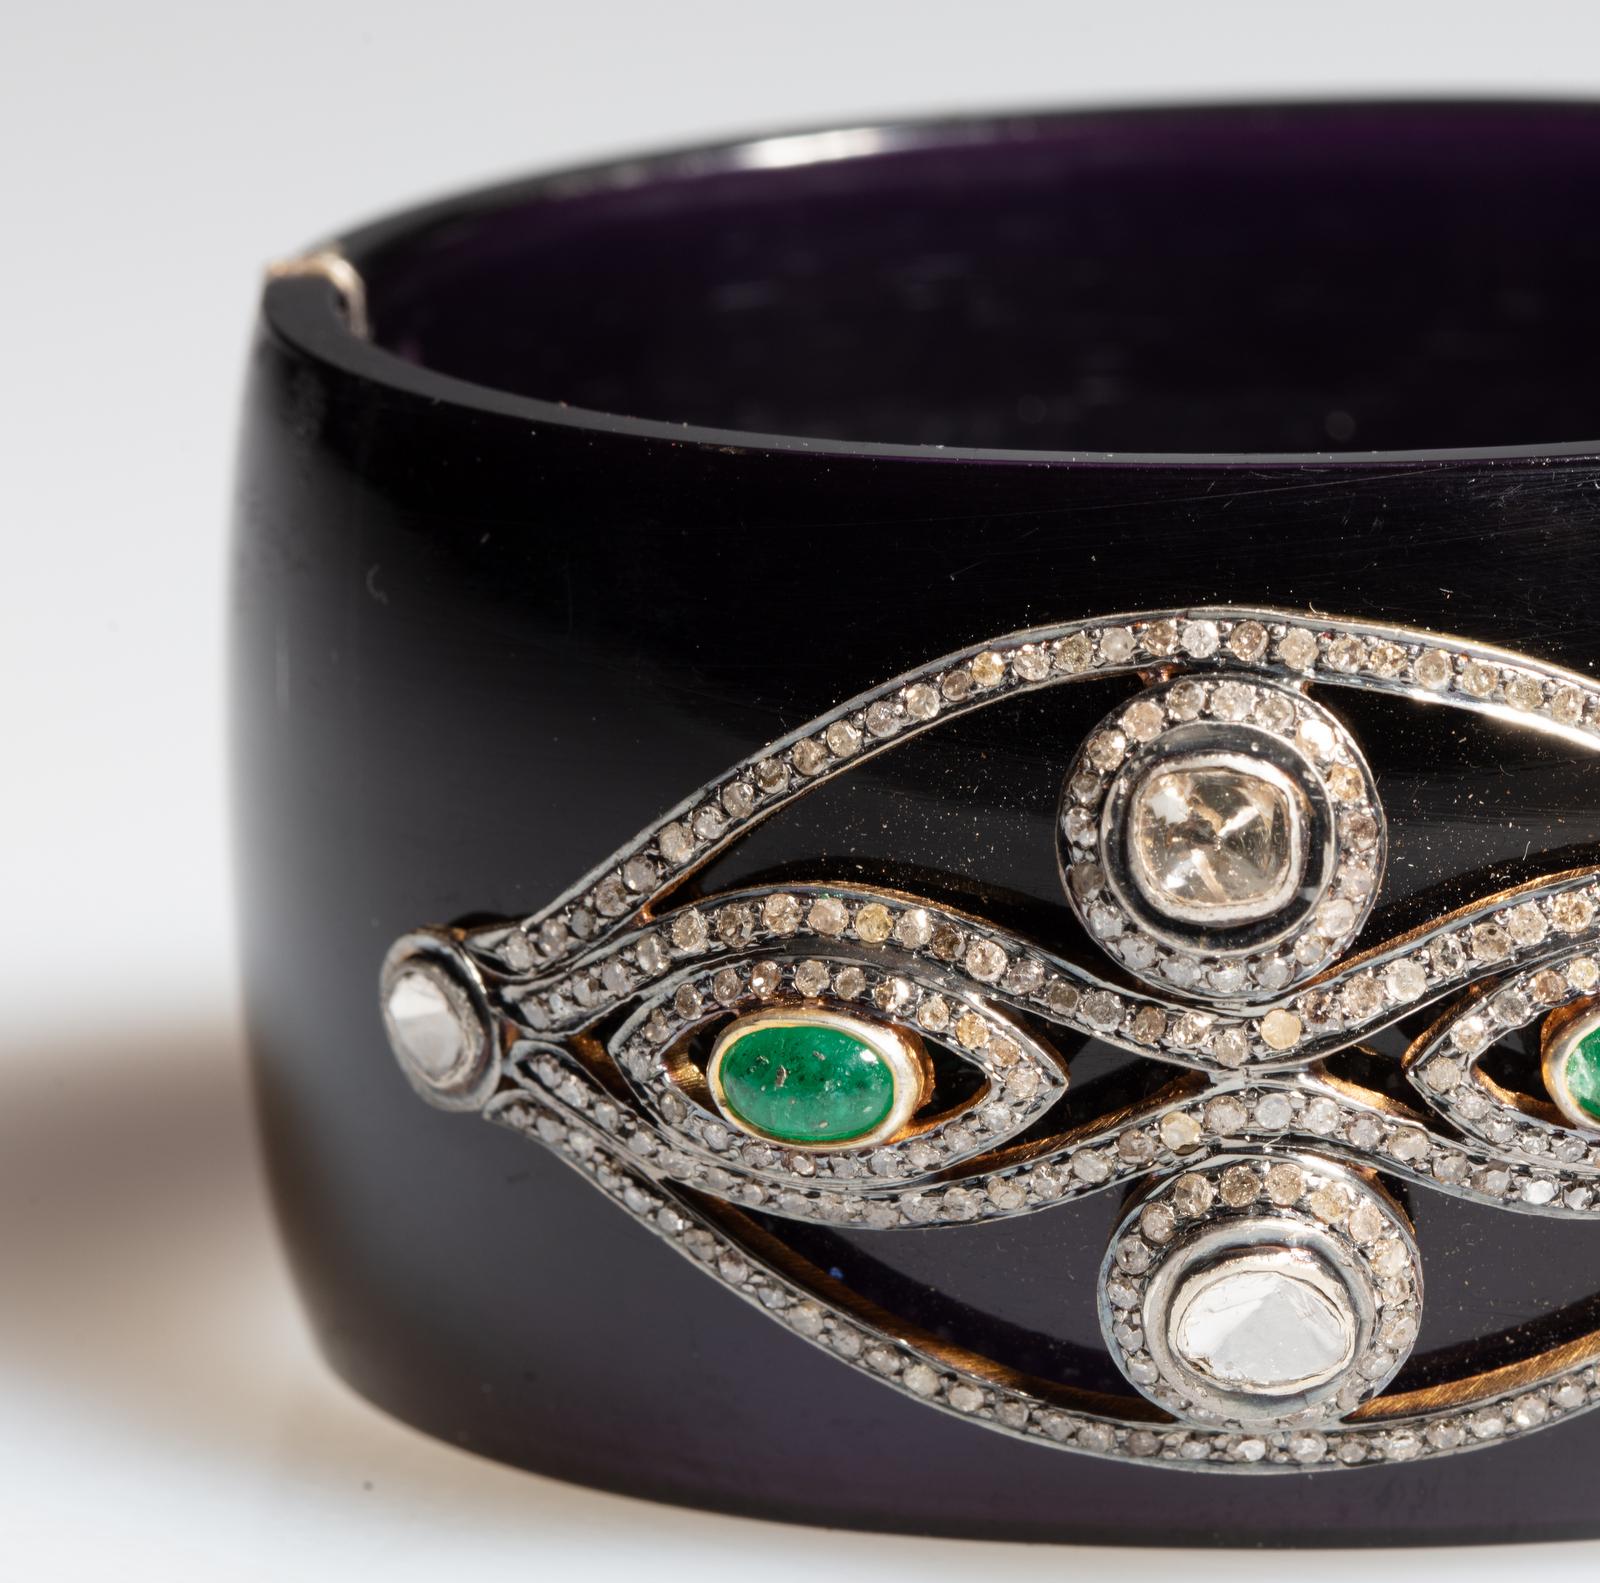 A black Bakelite cuff bracelet with an evil eye motif (offering protection from evil) of rose cut diamonds, oval cabochon emeralds surrounded in brilliant-cut pave-`set diamonds all set in sterling silver.  A sterling silver push clasp with two